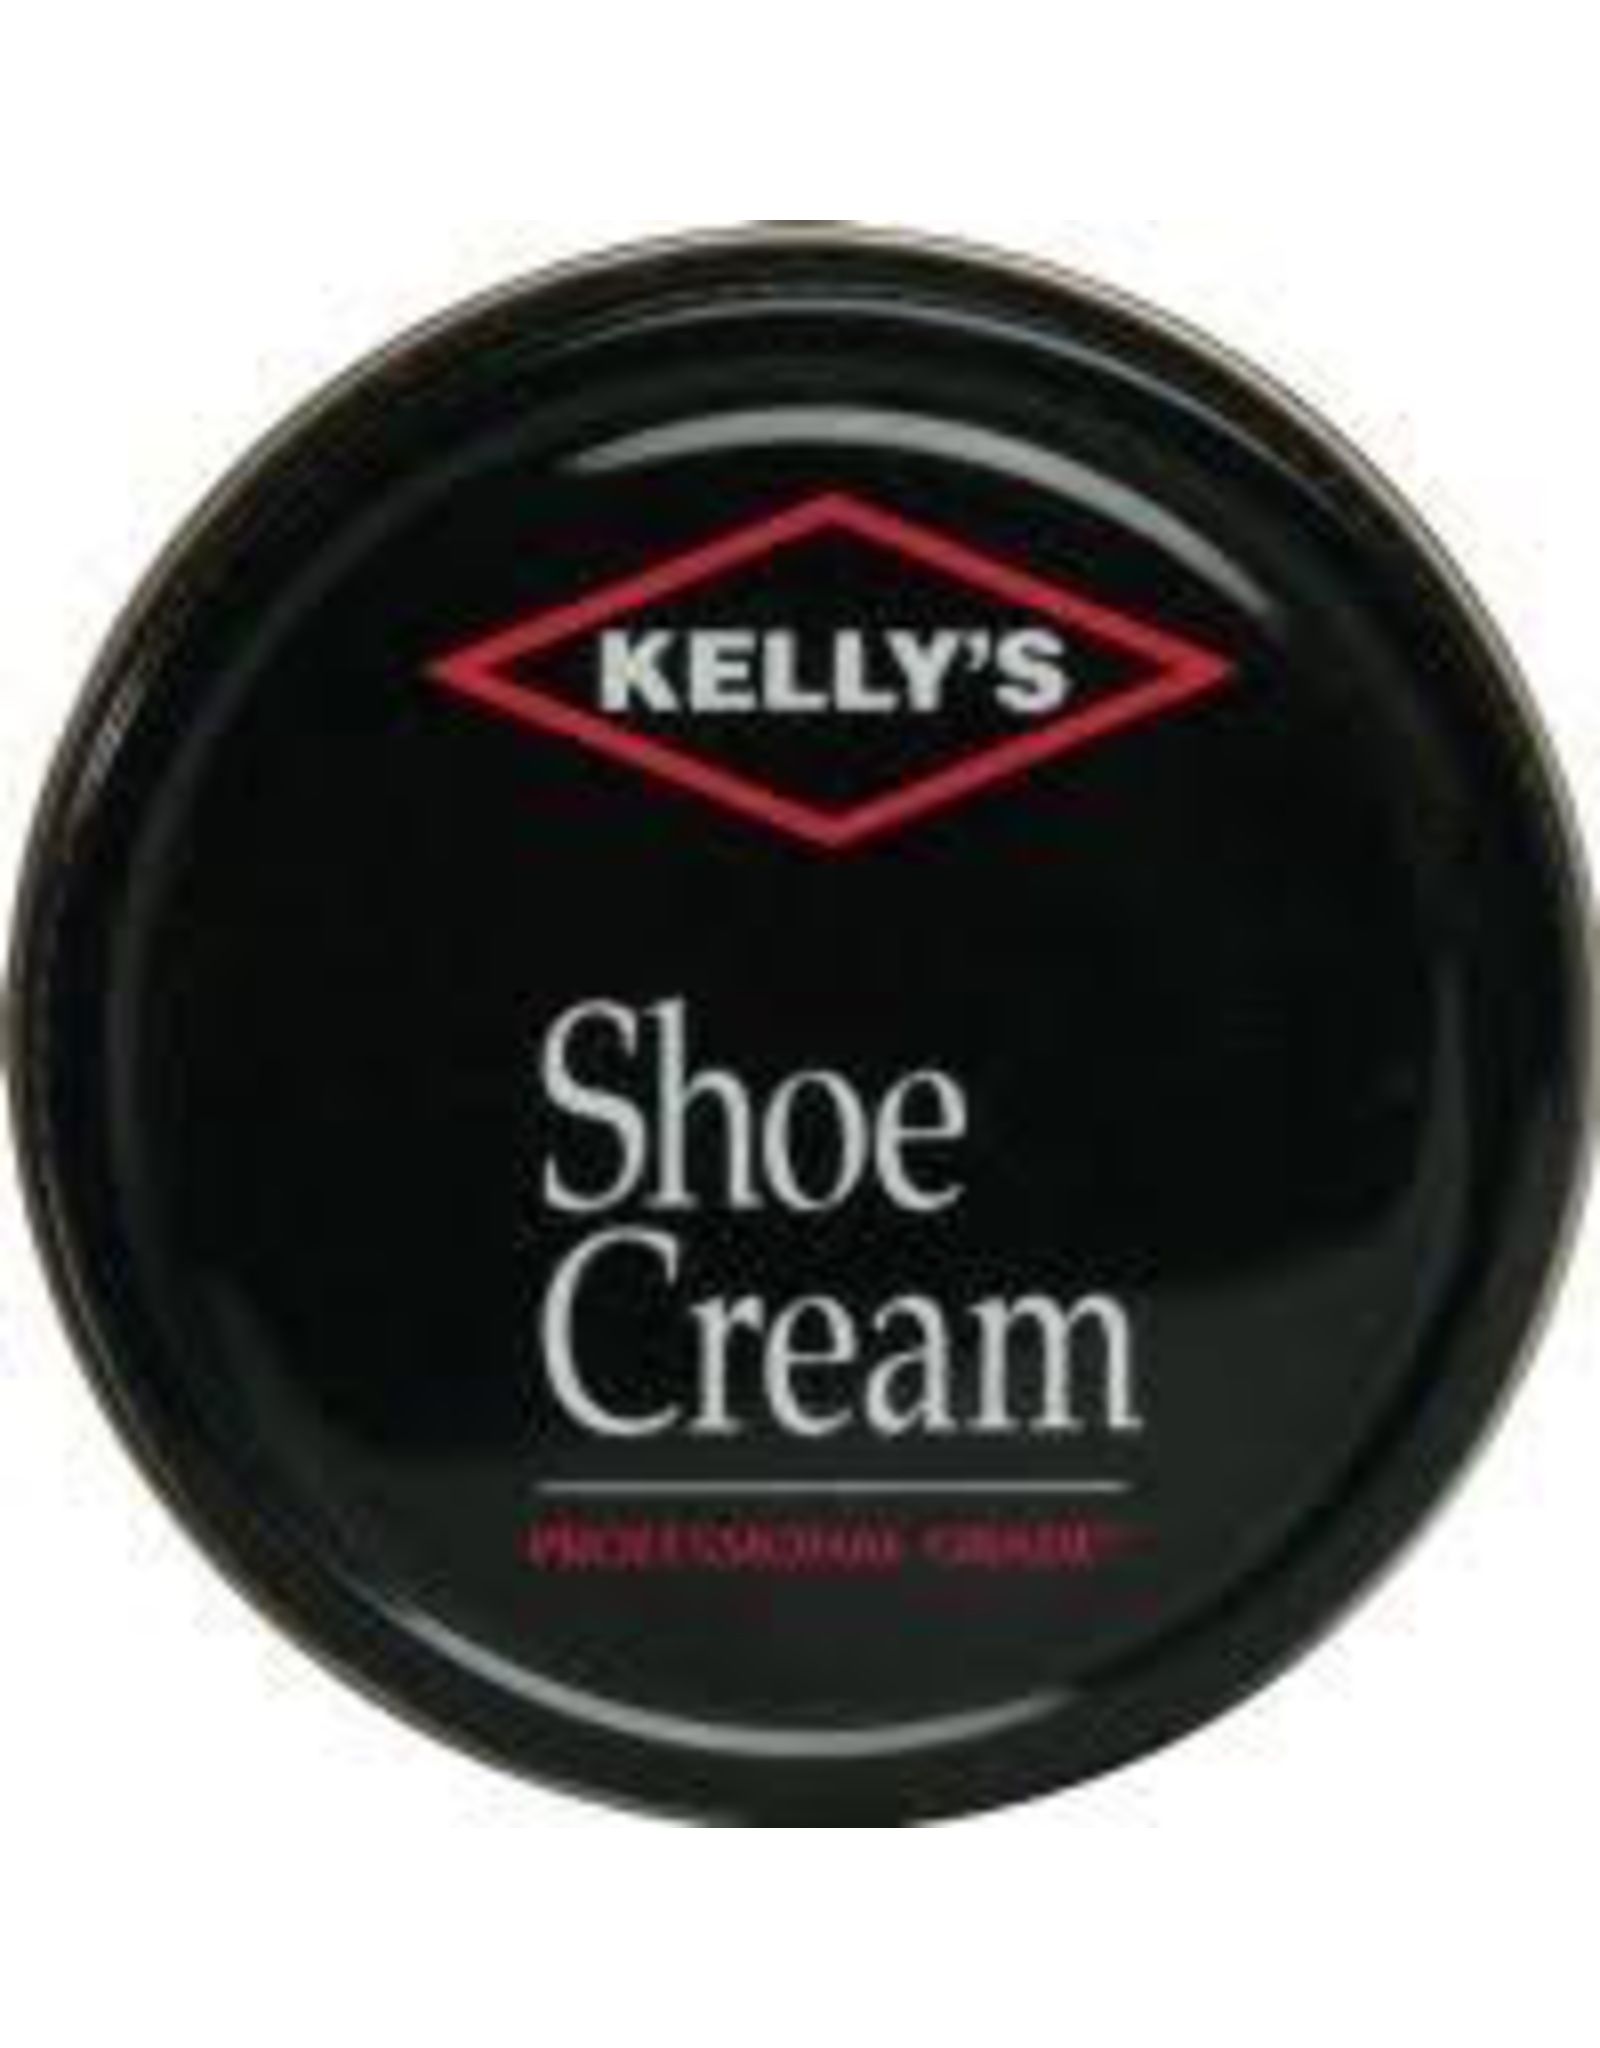 Boot Care Products Kelly's Shoe Cream